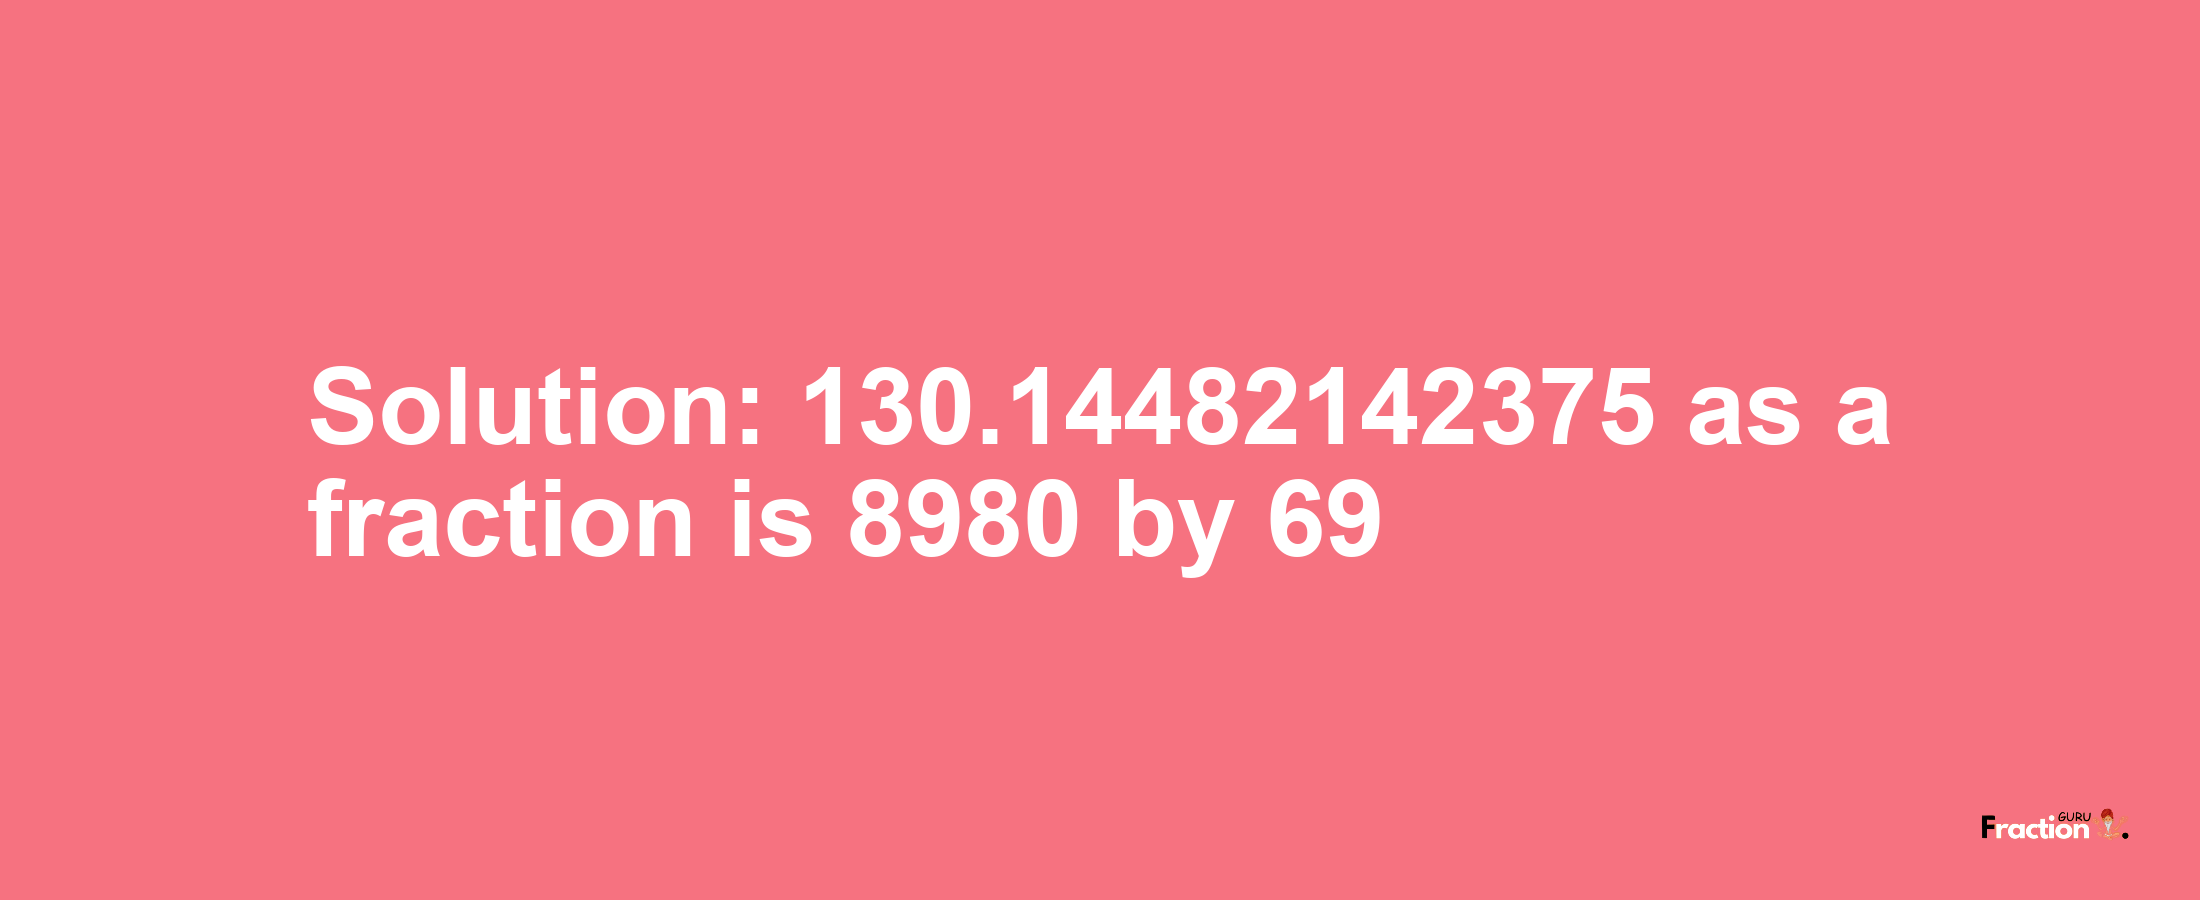 Solution:130.14482142375 as a fraction is 8980/69